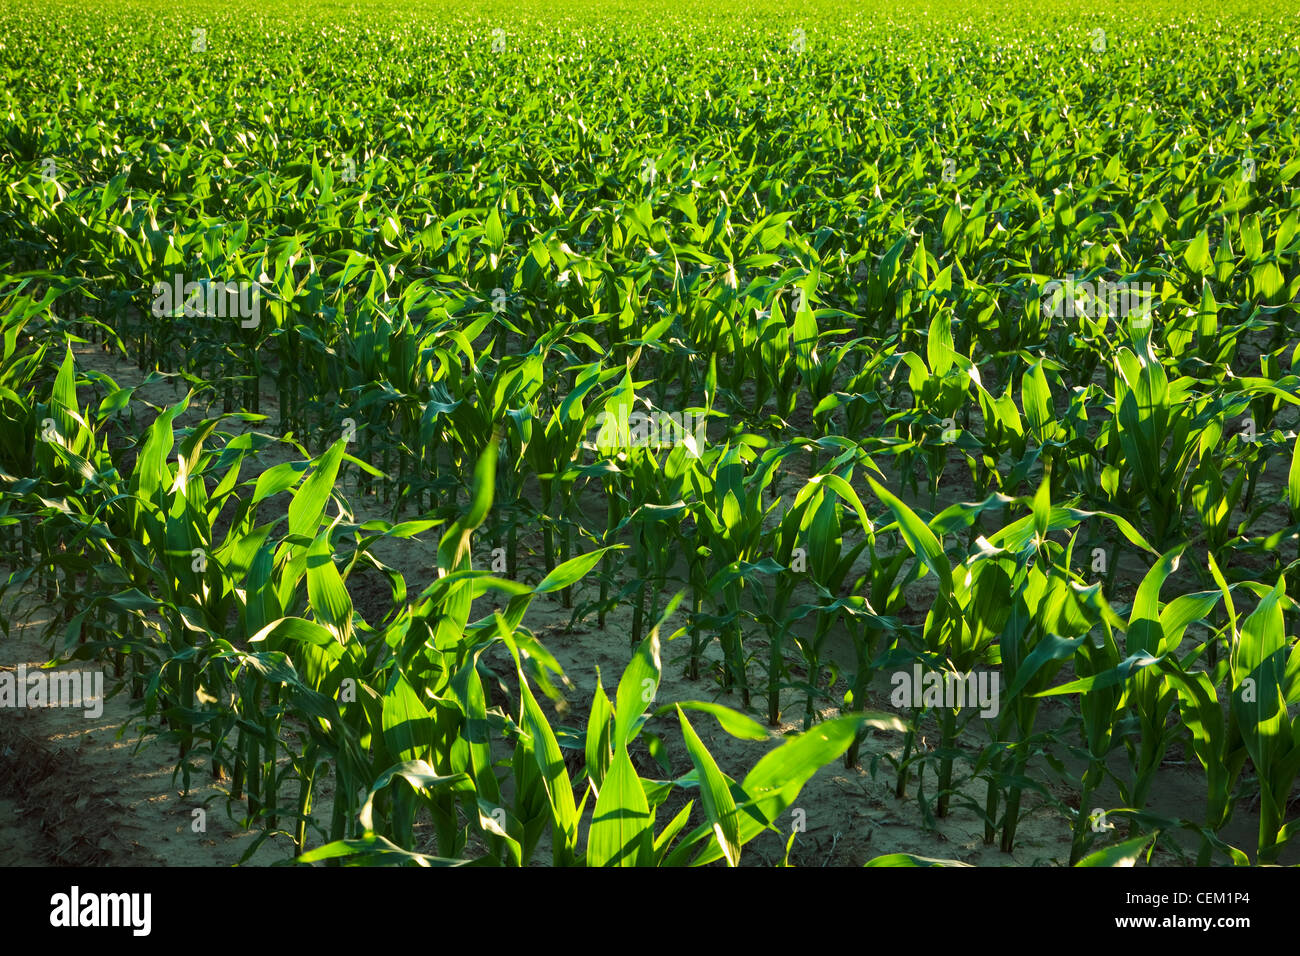 Agriculture - Rows of mid growth grain corn plants at the 12 leaf pre tassel stage / near England, Arkansas, USA. Stock Photo